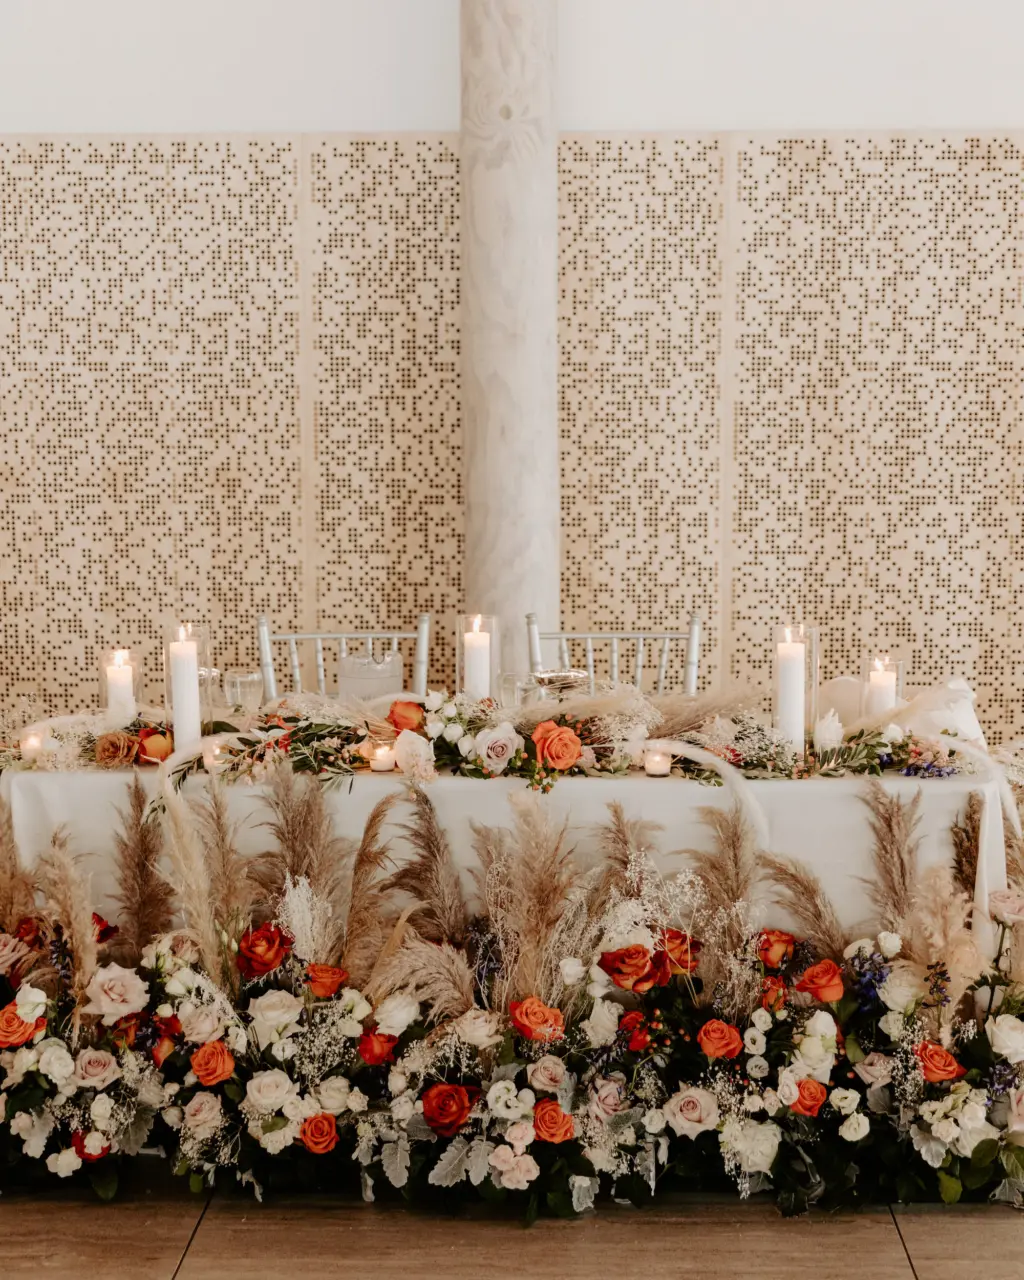 Boho Sweetheart Table for Wedding Reception with Candles, Pampas Grass, Orange, Pink, and White Roses, Baby's Breath, and Greenery Floor Flower Arrangement Ideas